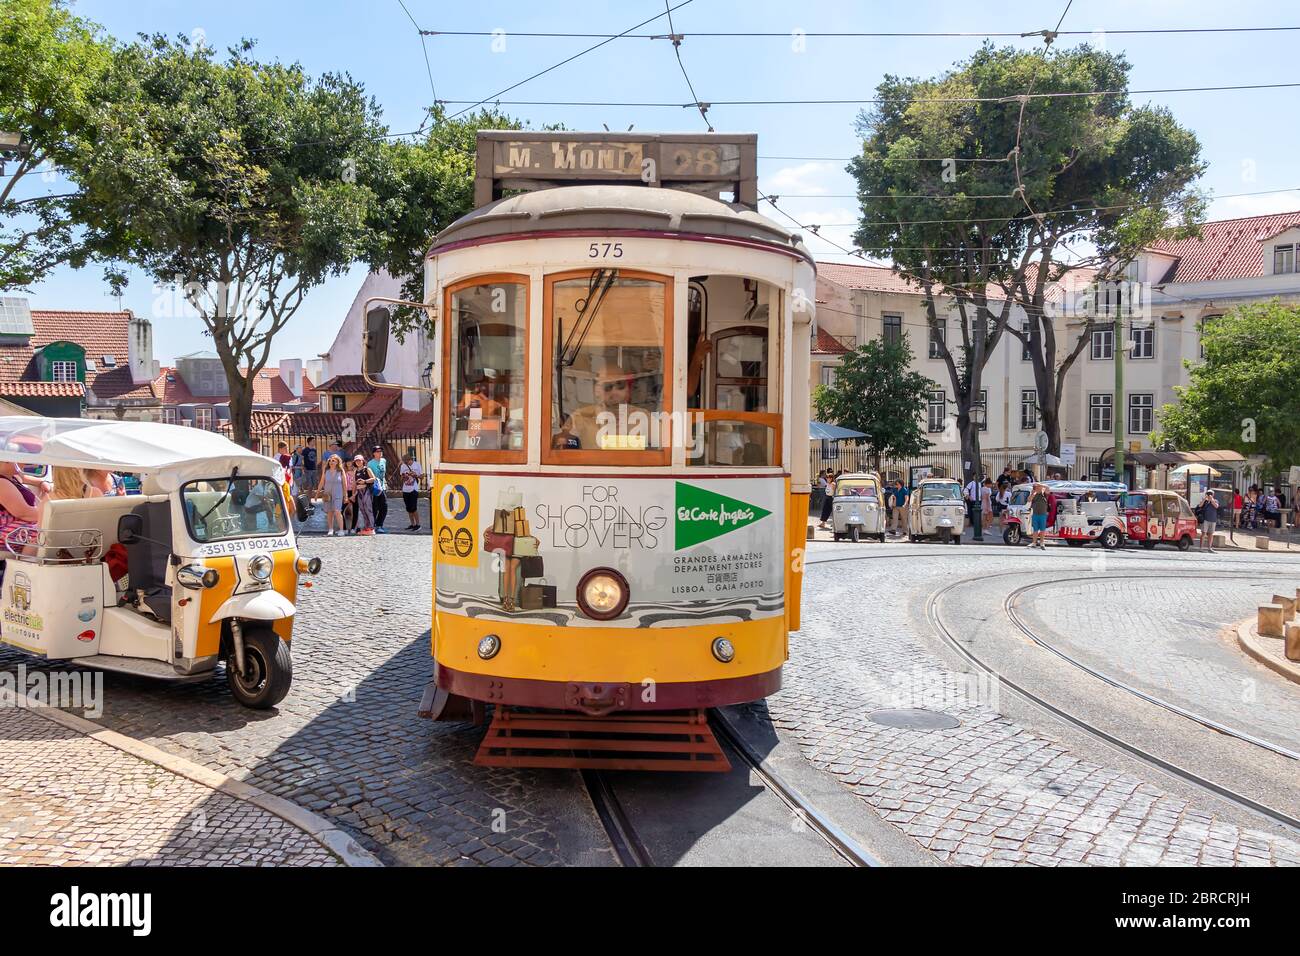 Lisbon, Portugal - July 15, 2019: The famous yellow tram 28 passing in front of Santa Maria cathedral in Lisbon, Portugal Stock Photo